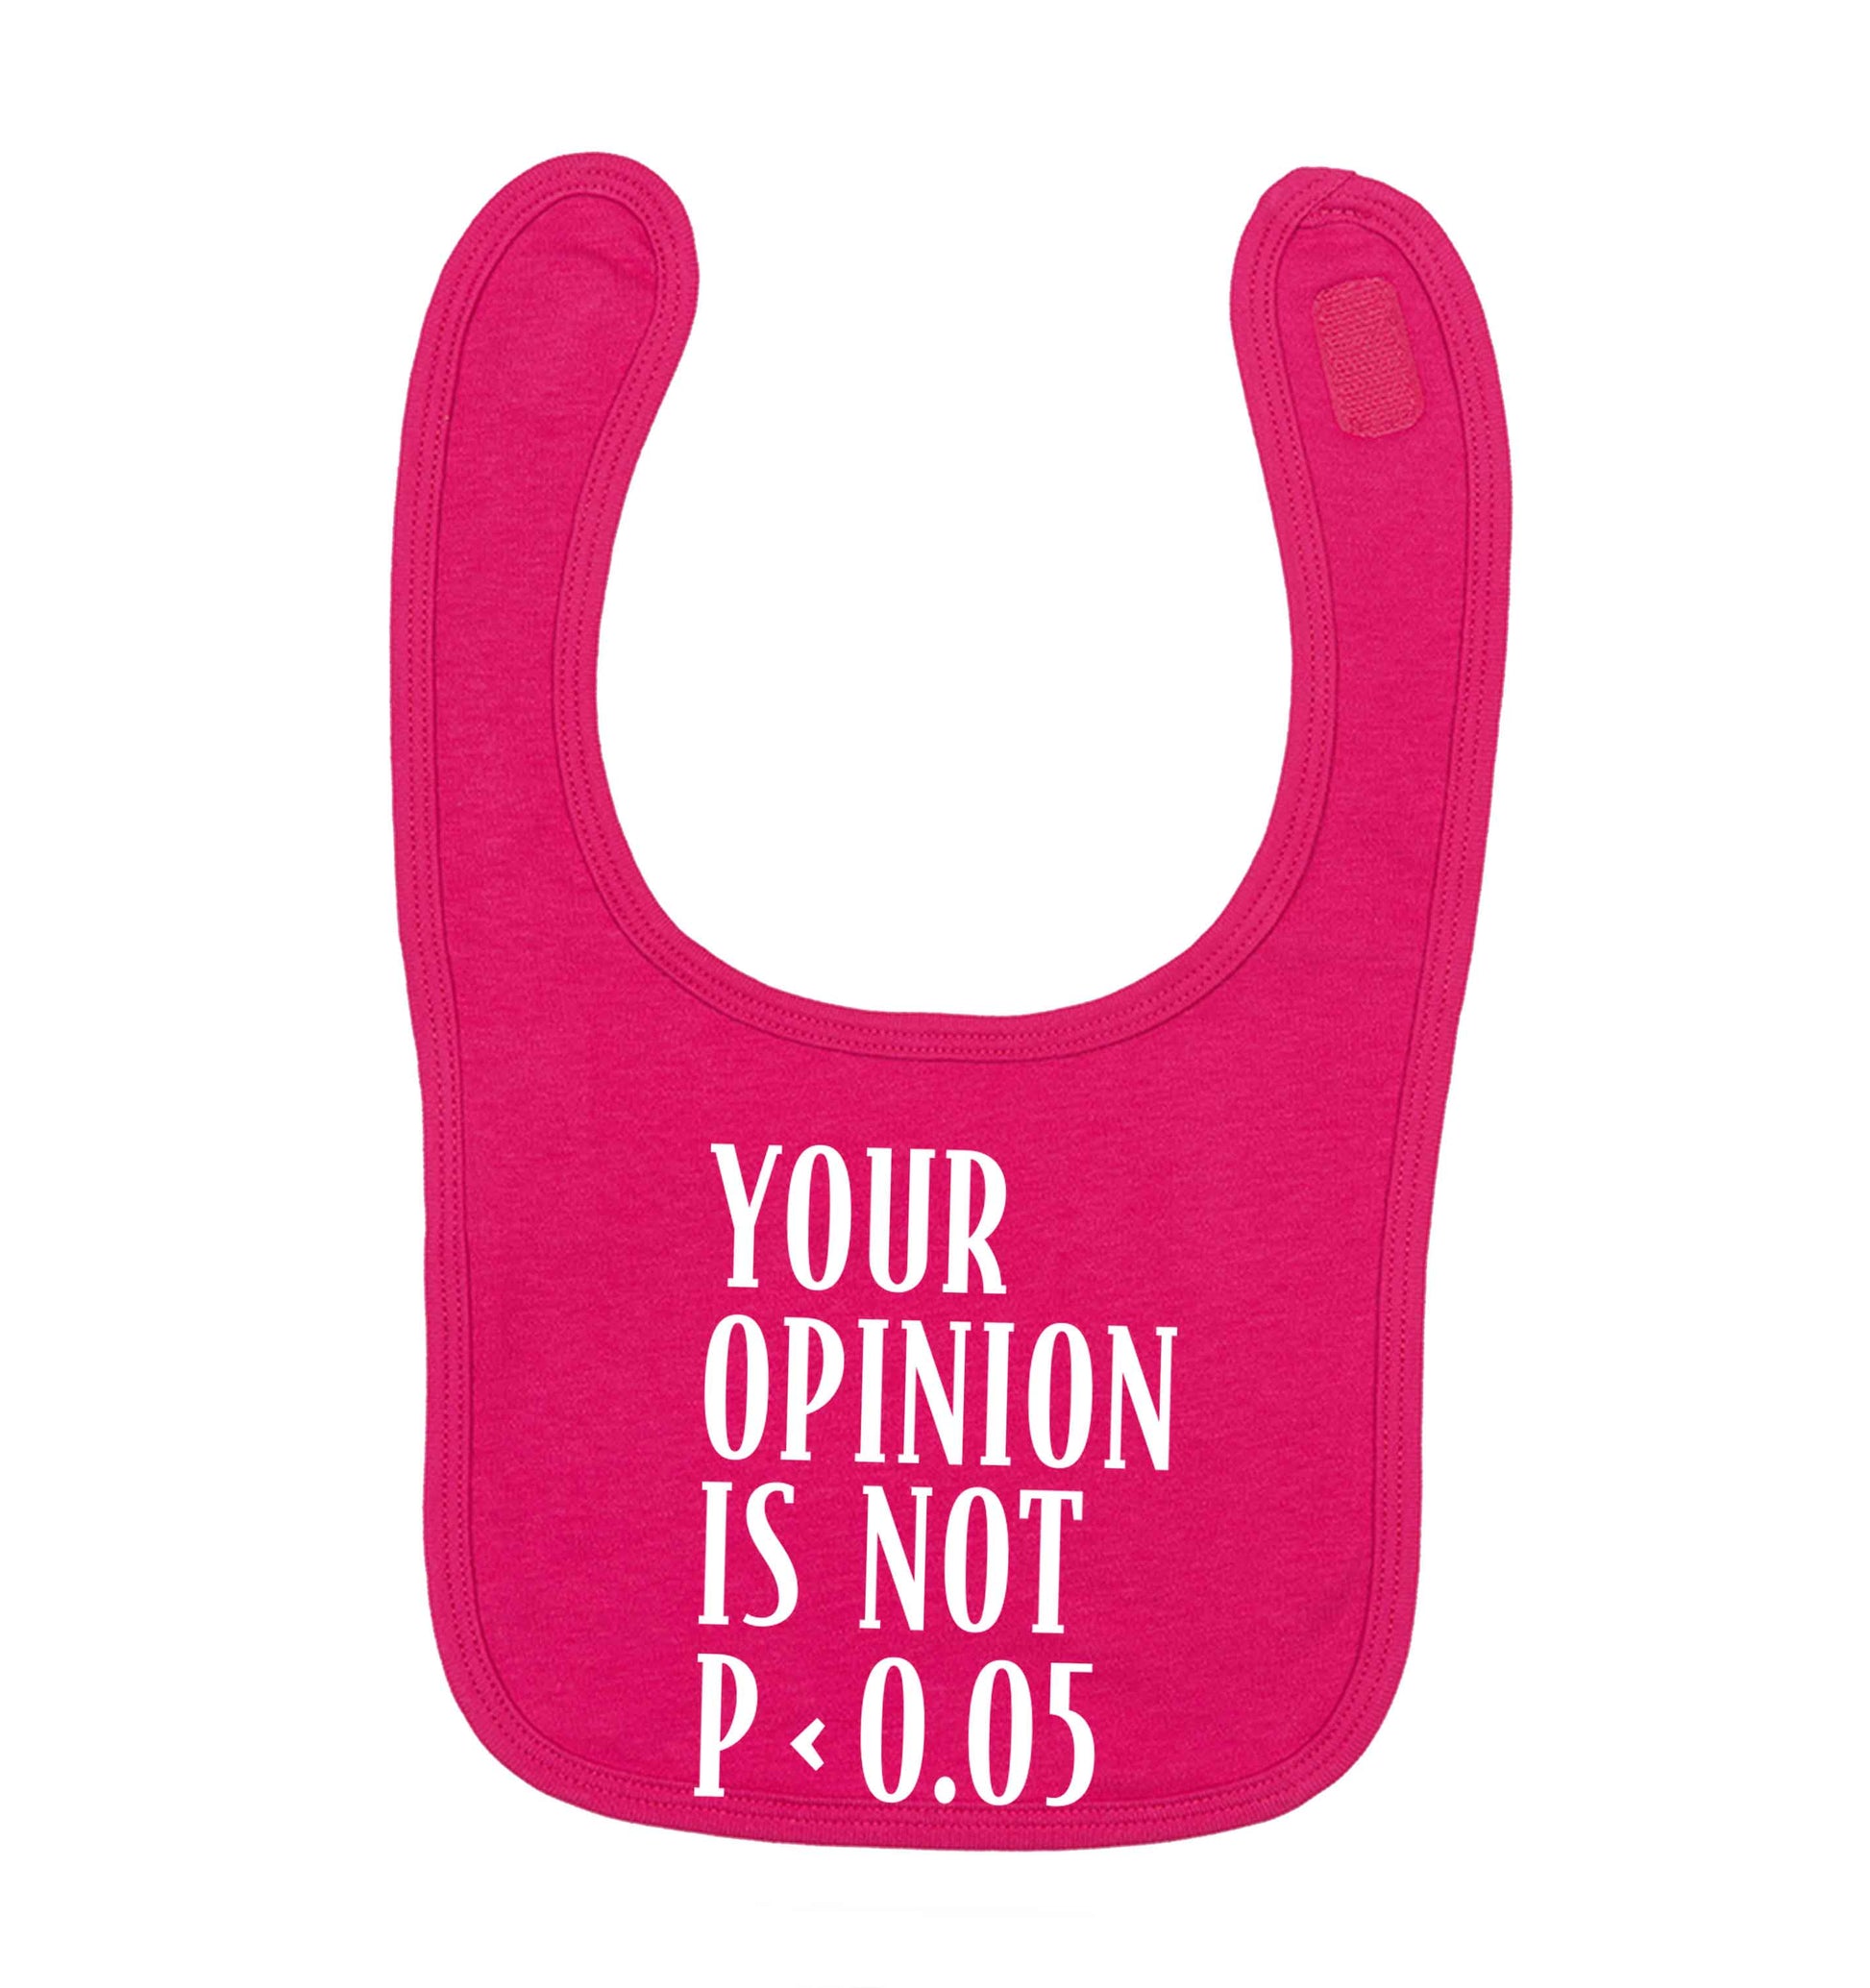 Your opinion is not P < 0.05dark pink baby bib